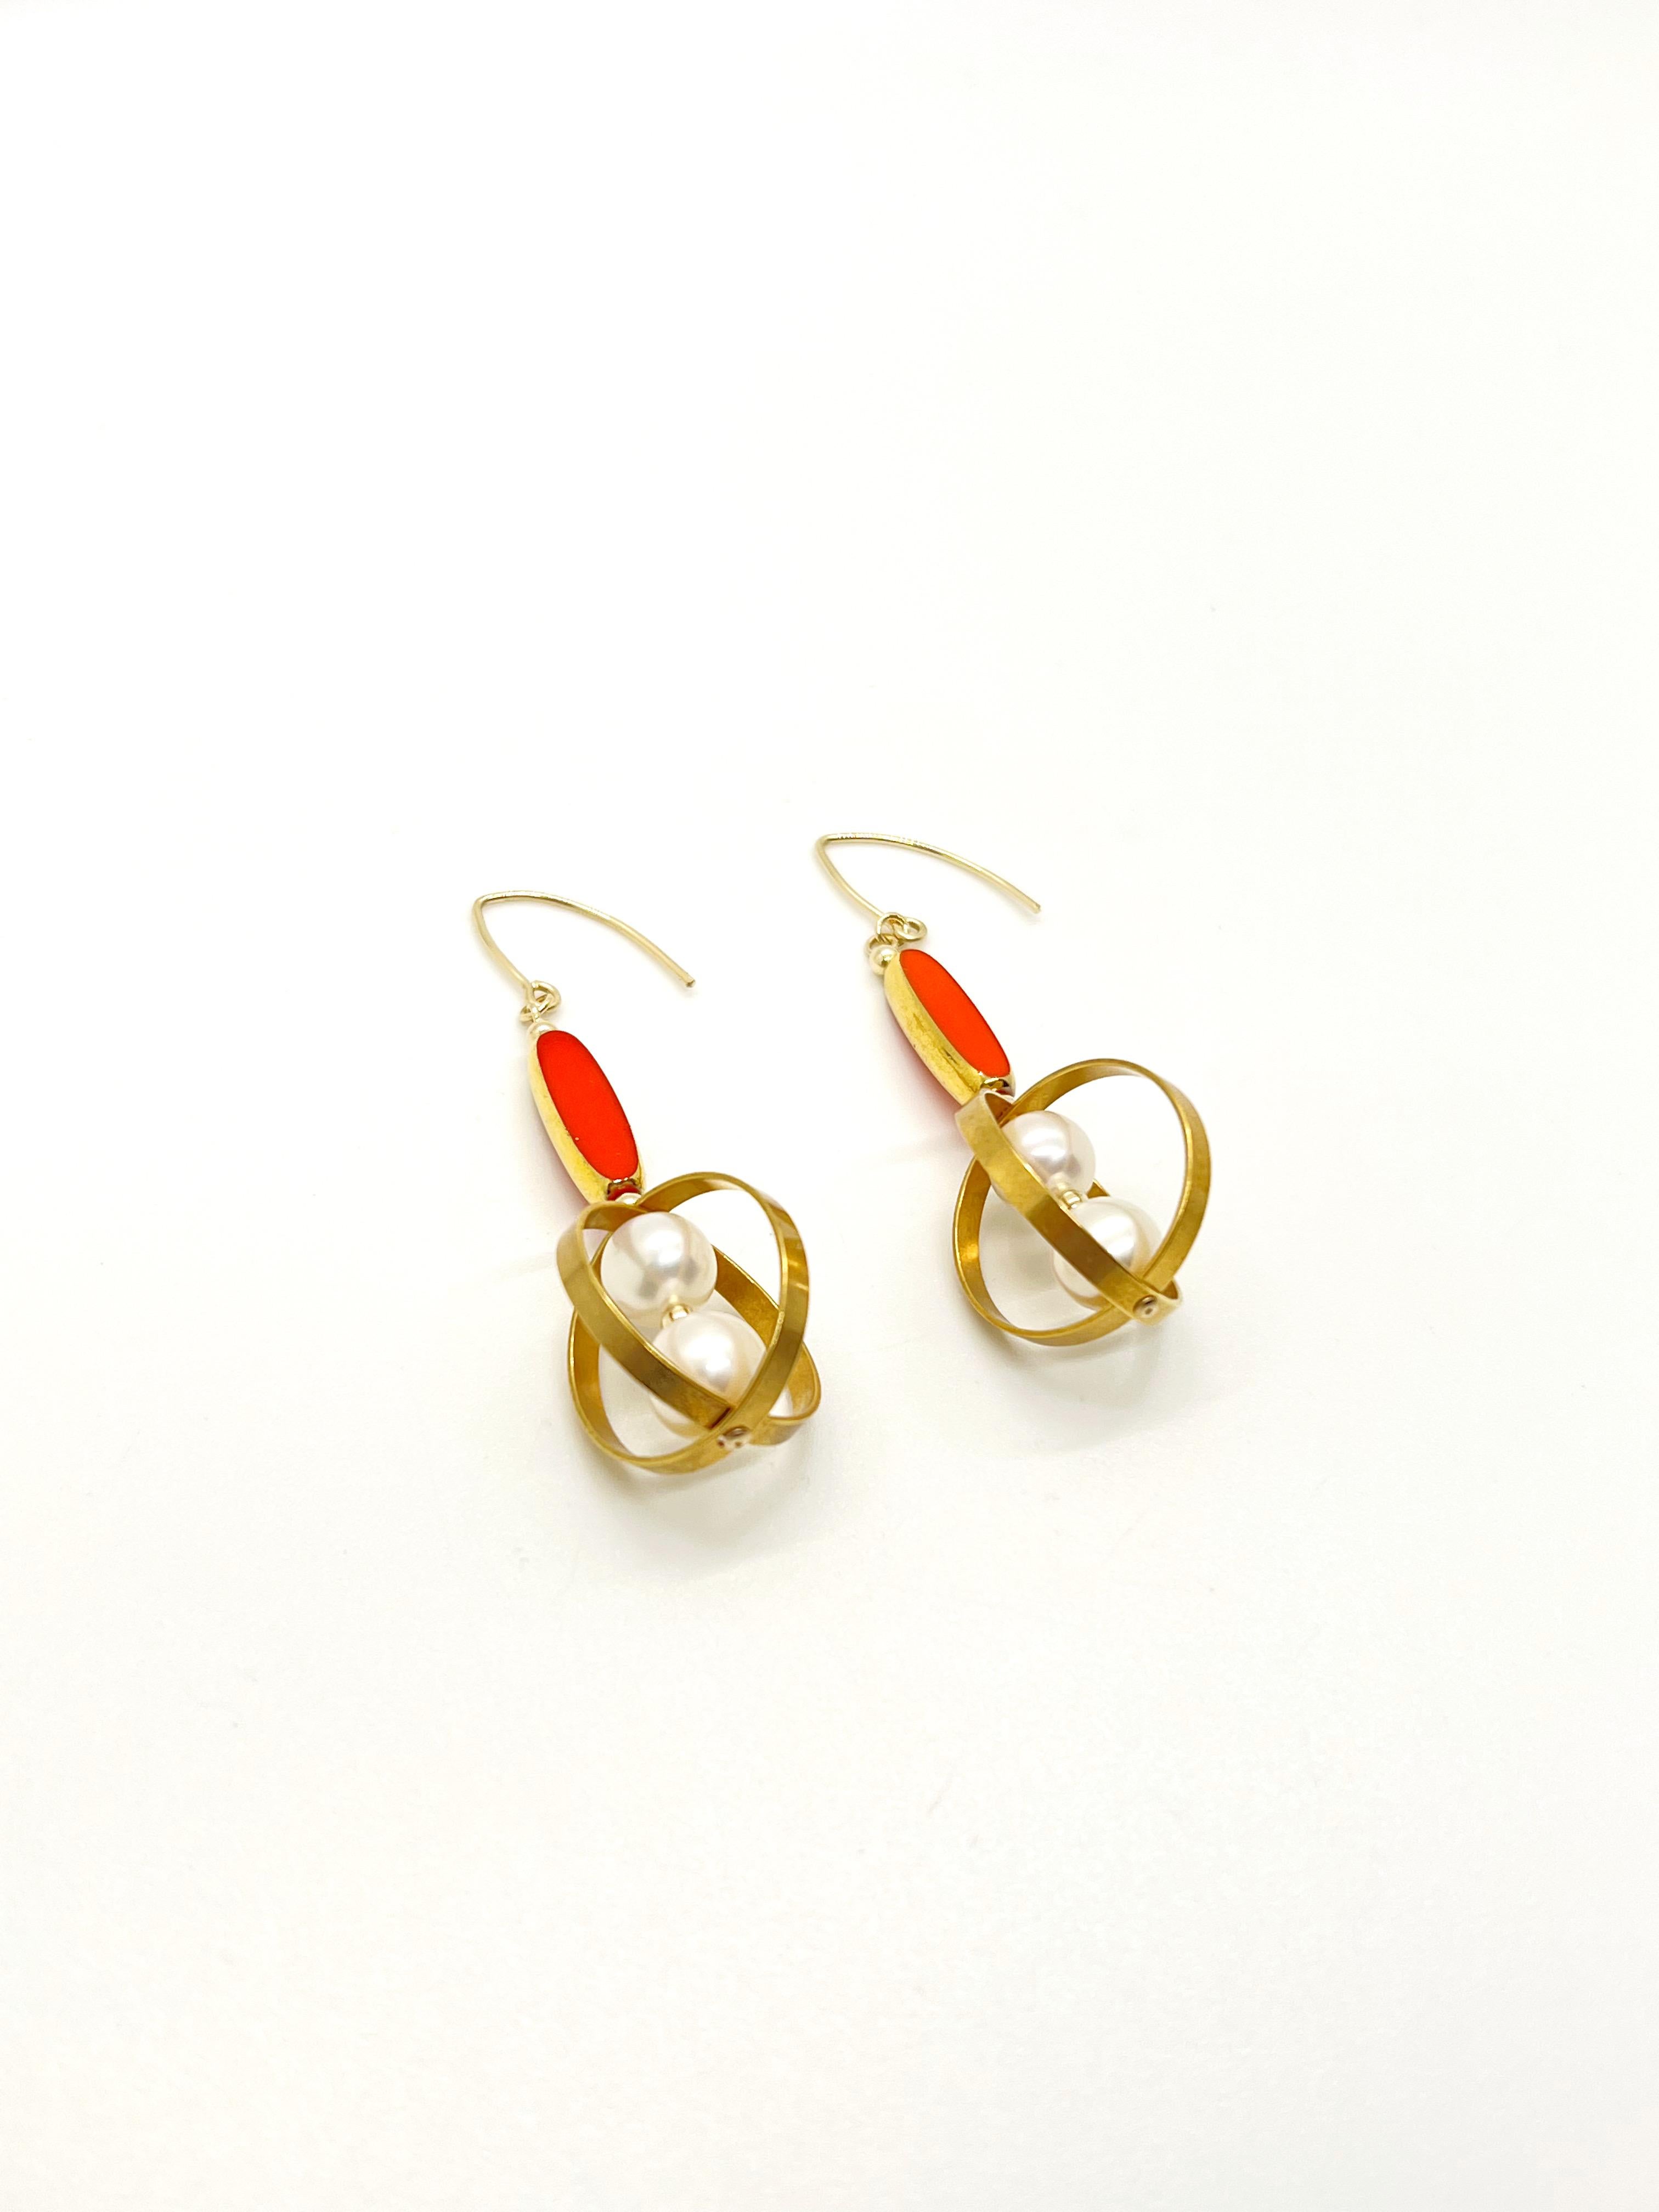 These earrings are made to order.

These earrings are composed of German Vintage Glass Beads that are edged with 24K gold. It is incorporated with freshwater pearls set in a geometric orbital frame.

The vintage glass beads that is framed with 24K